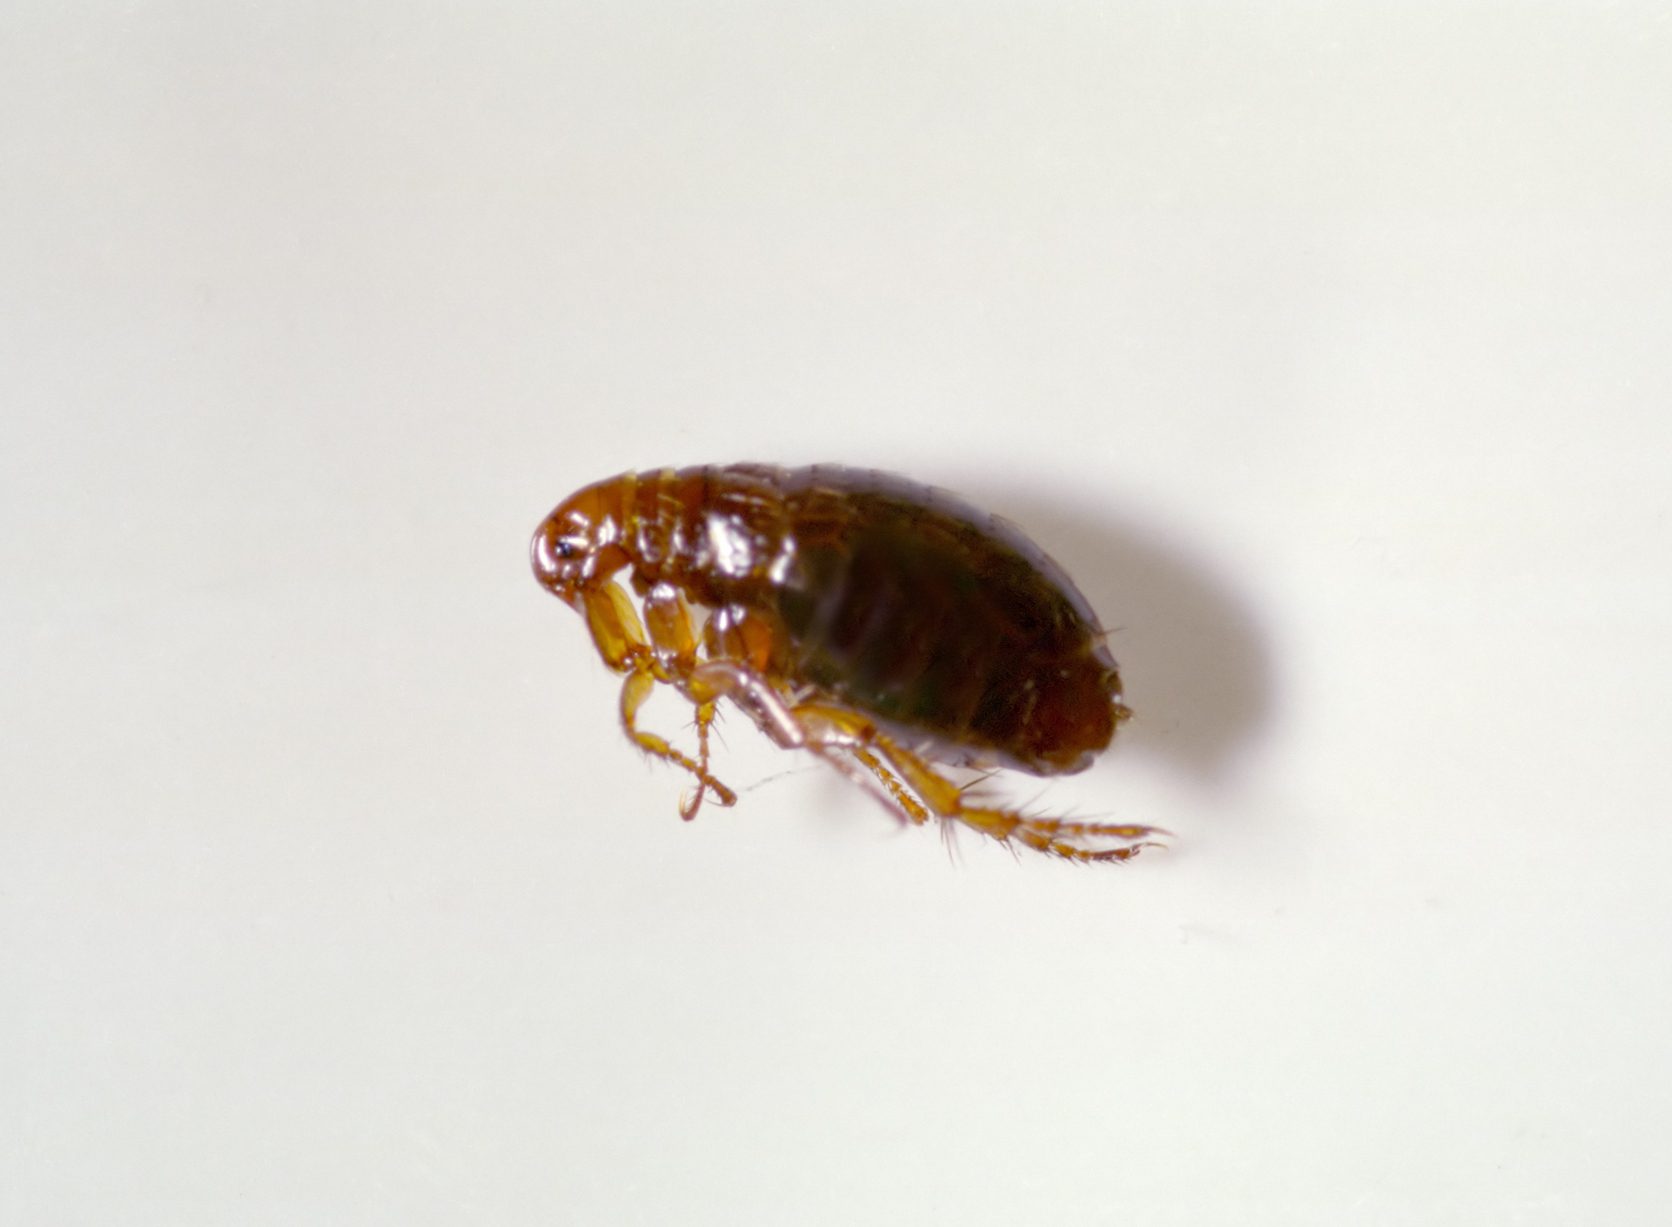 Close up picture of a flea on white background